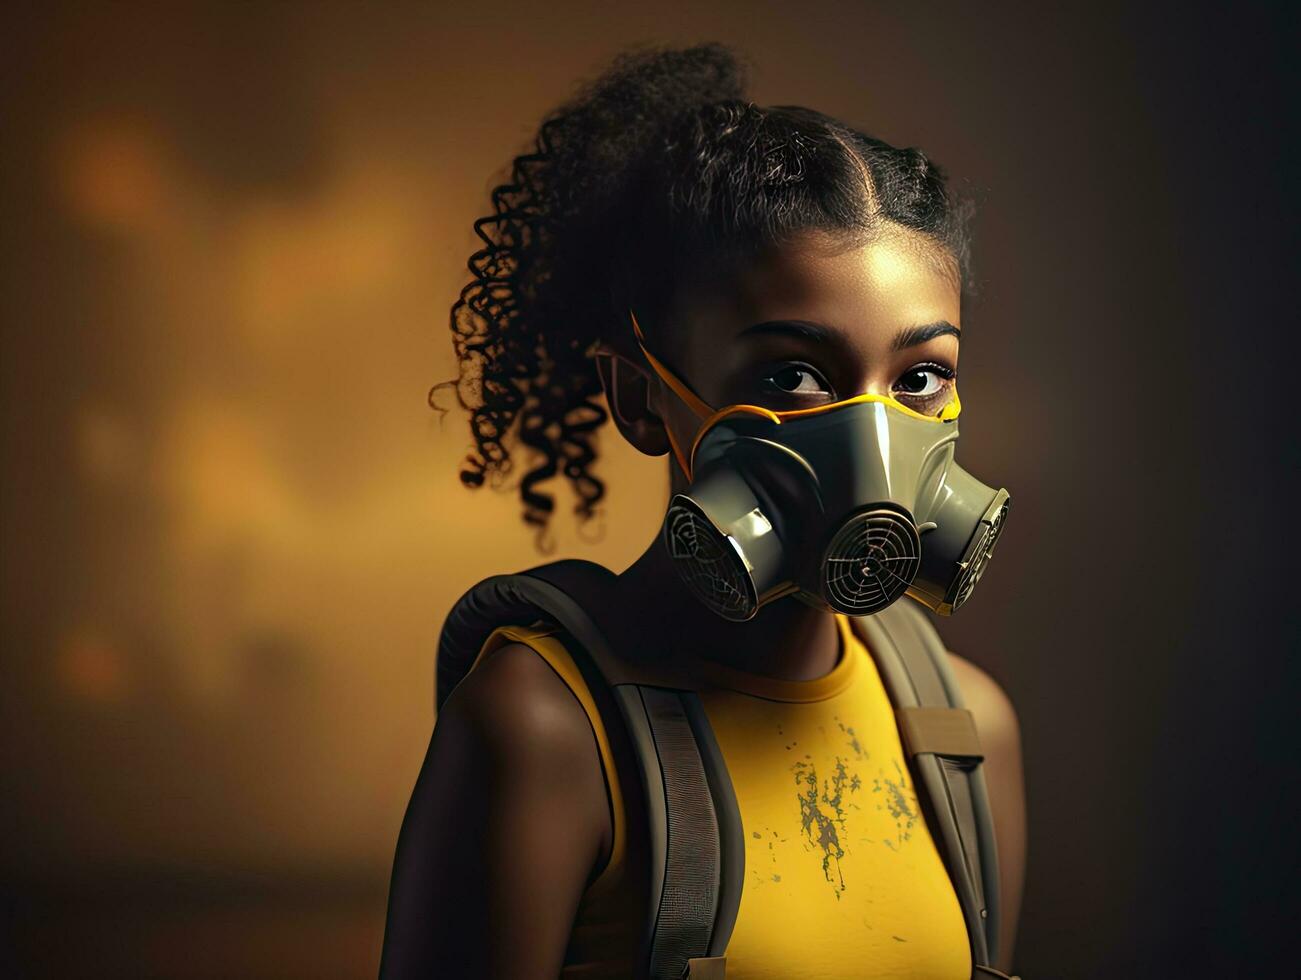 A dark skinned girl student wearing a yellow dress and respiratory mask arrived at class with a school backpack photo